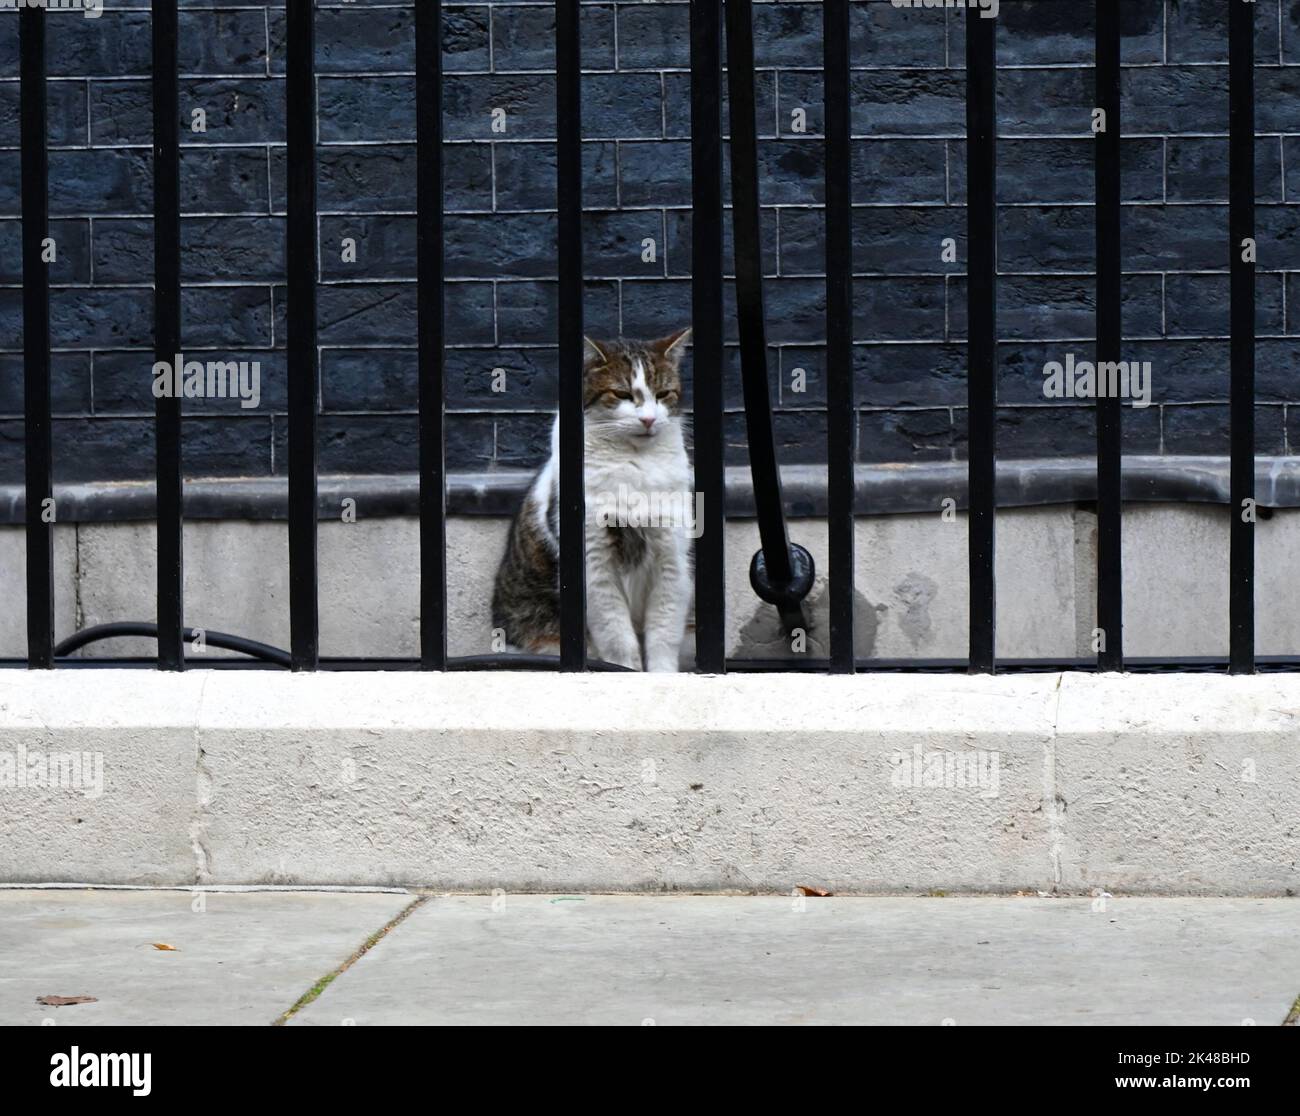 Larry is a rescued stray cat from the Battersea Dogs & Cats Home who was chosen by Downing Street staff.Larry was intended to be a pet for the children of David and Samantha Cameron, and was described by Downing Street sources as a good ratter and as having a high chase-drive and hunting instinct'. In 2012, Battersea Dogs & Cats Home revealed that Larry's popularity had resulted in a 15 percent surge of people adopting cats. Stock Photo